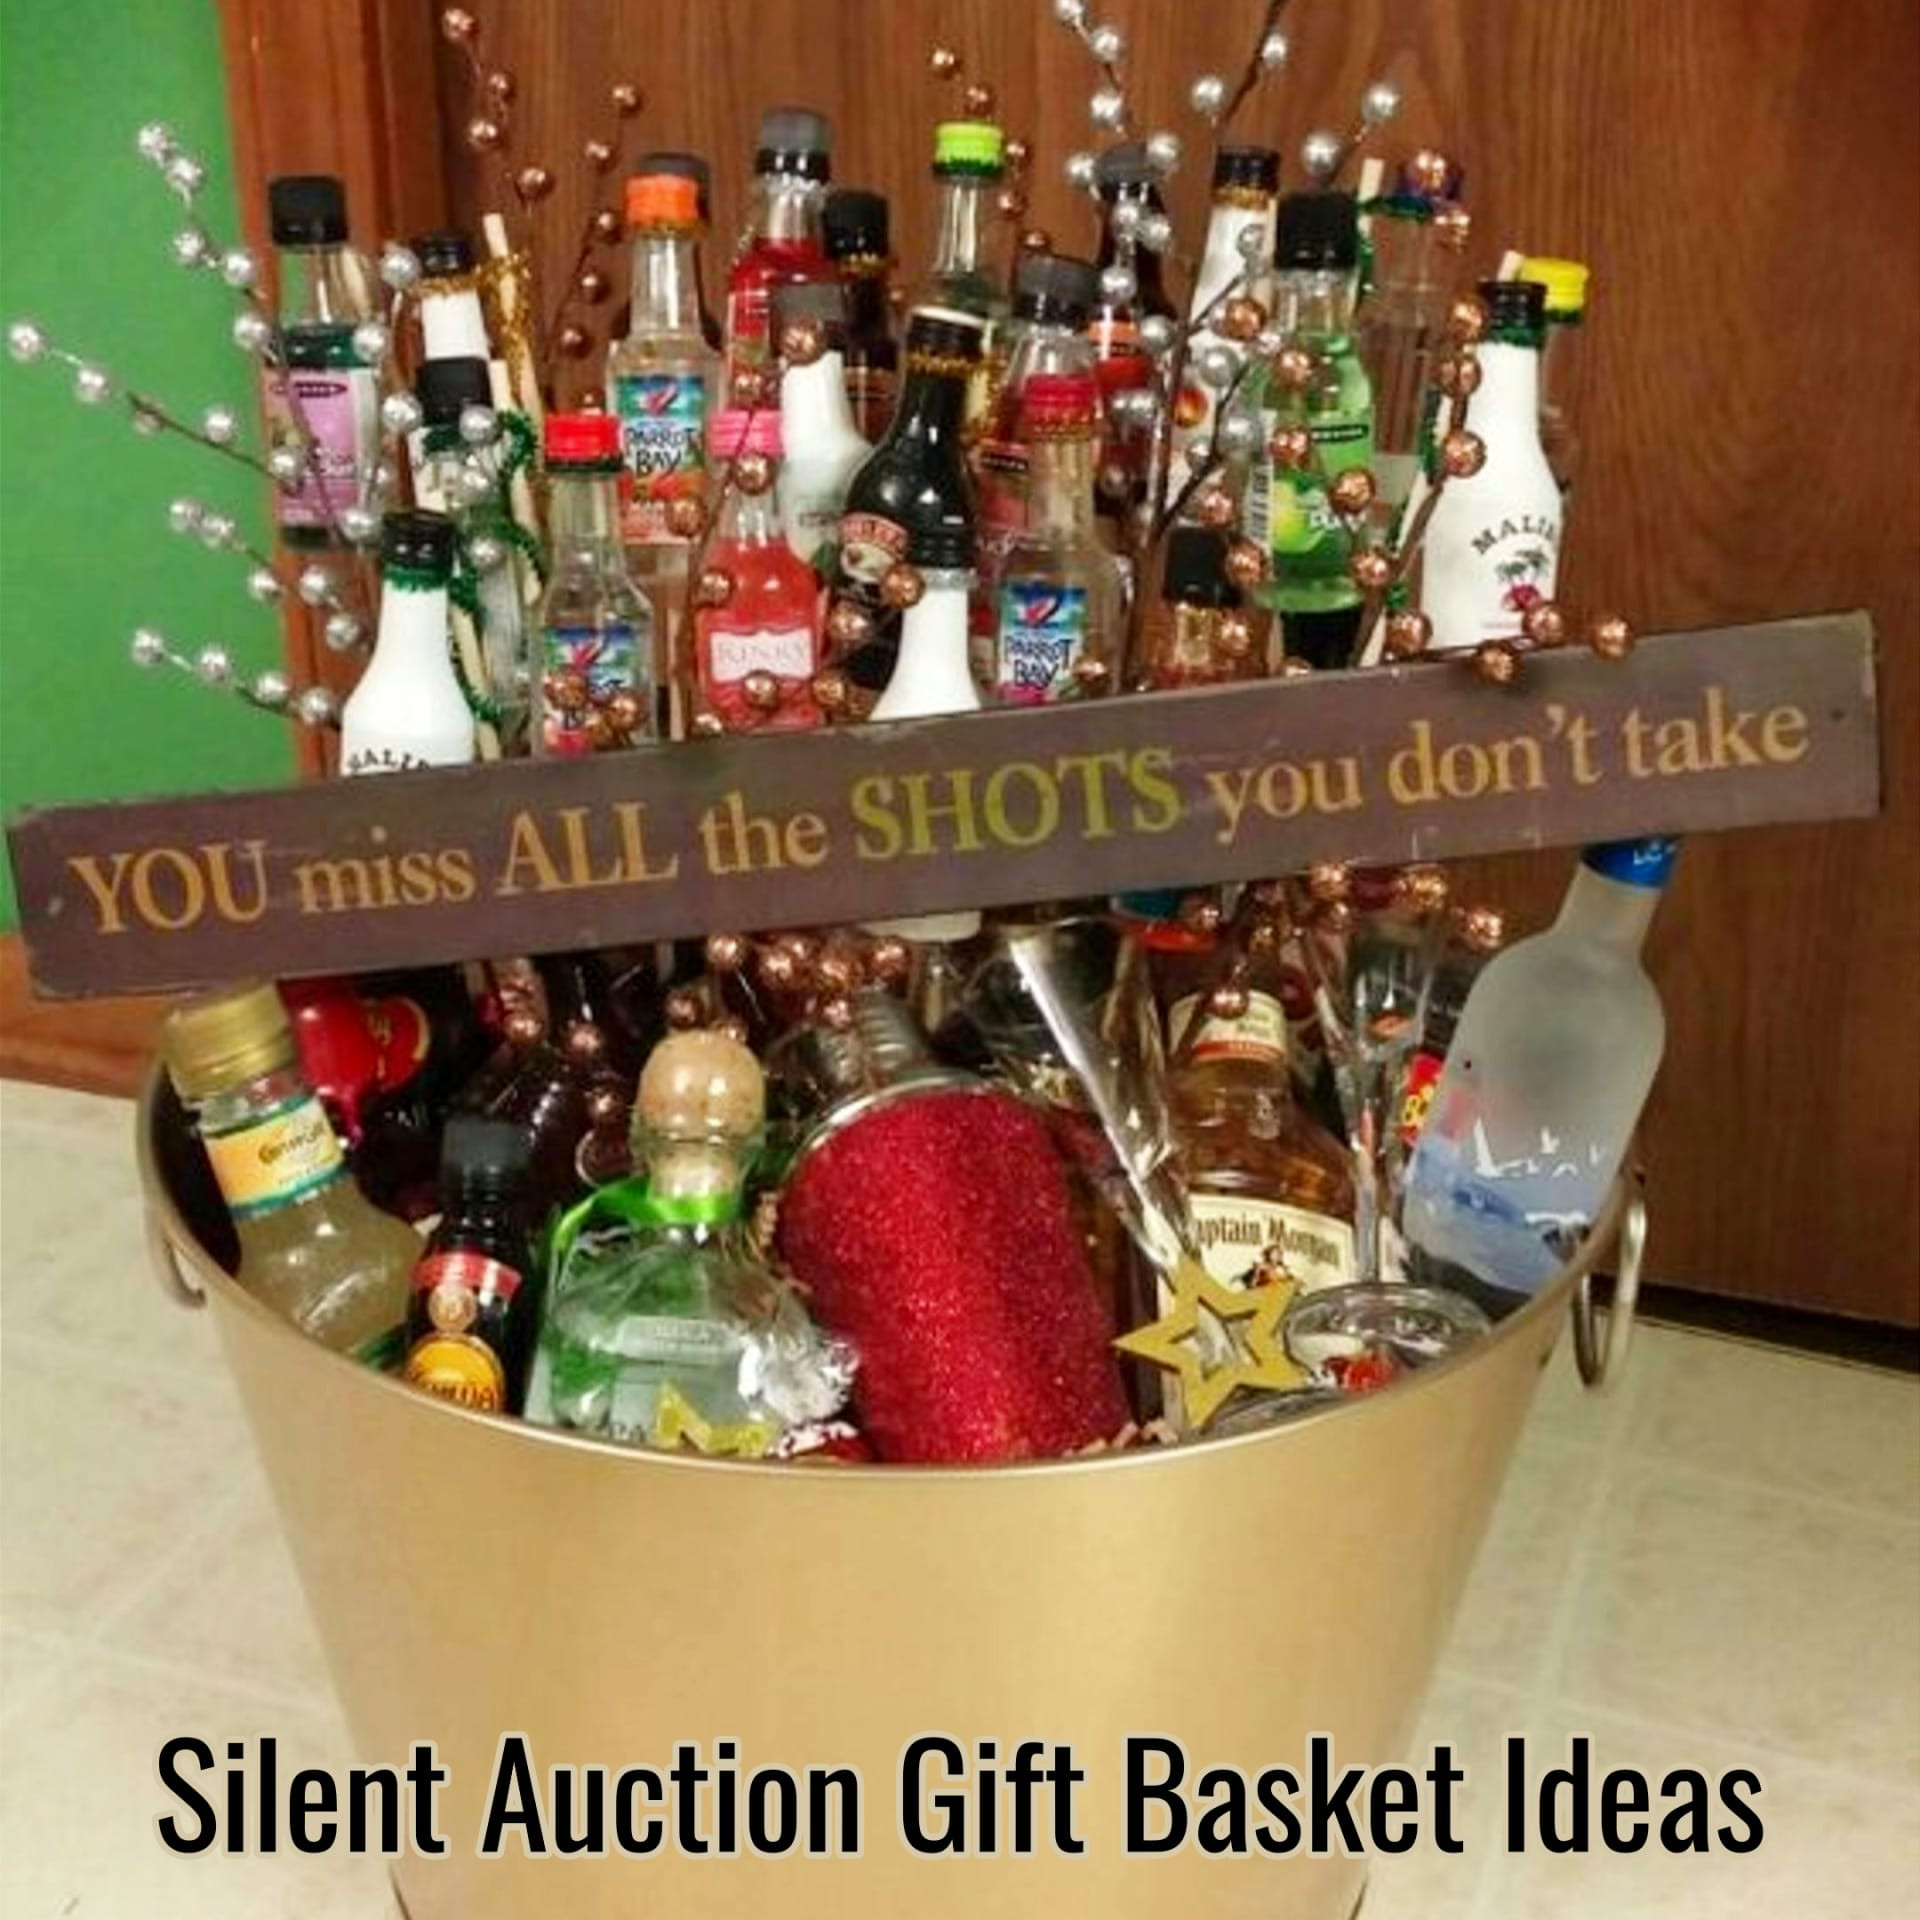 Ideas For Gift Baskets To Auction
 Creative Raffle Basket Ideas for a Charity School or